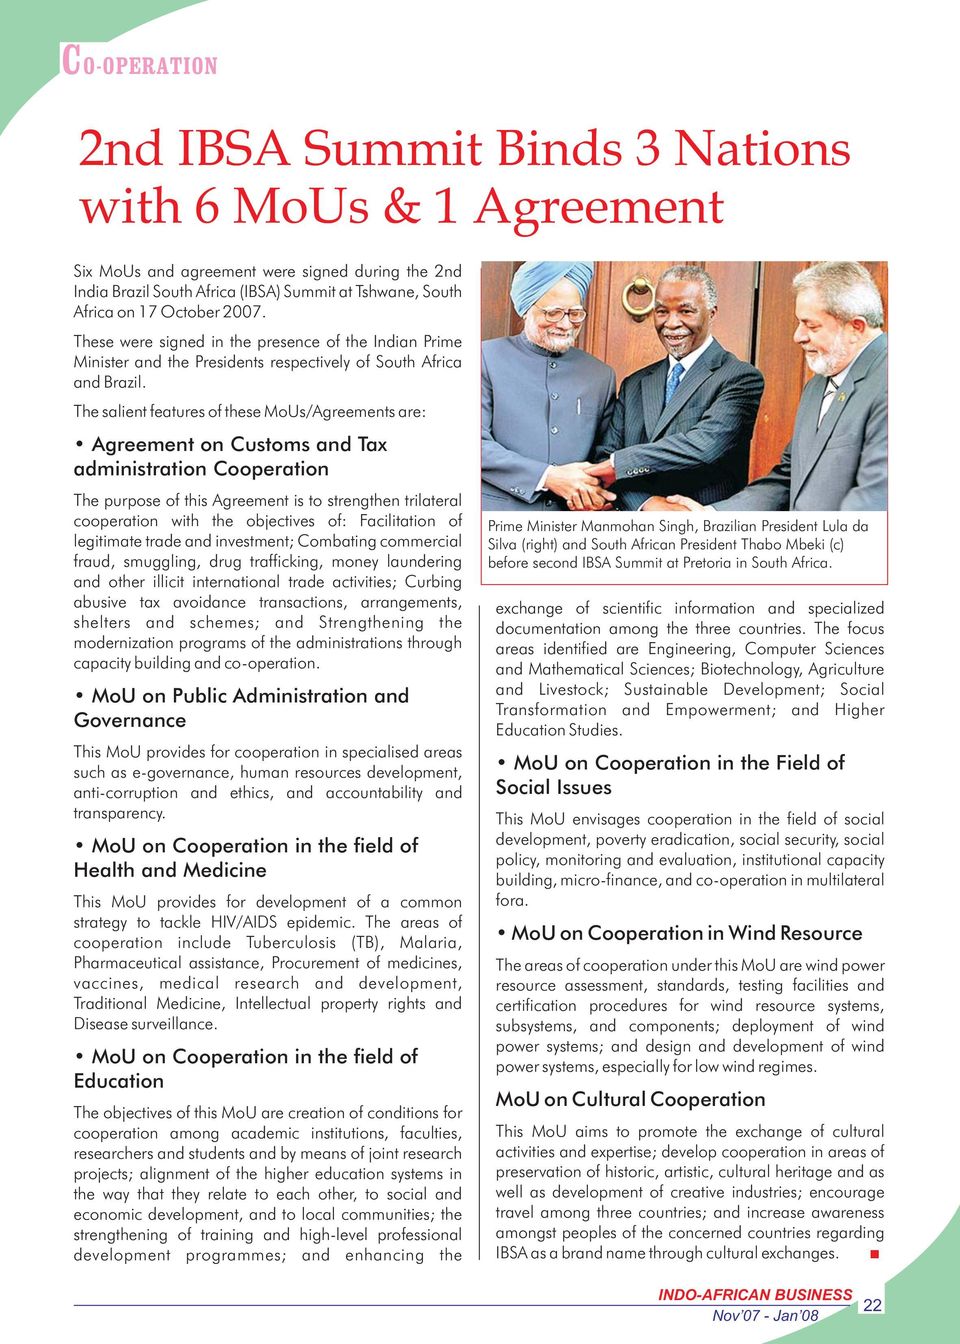 The salient features of these MoUs/Agreements are: Agreement on Customs and Tax administration Cooperation The purpose of this Agreement is to strengthen trilateral cooperation with the objectives